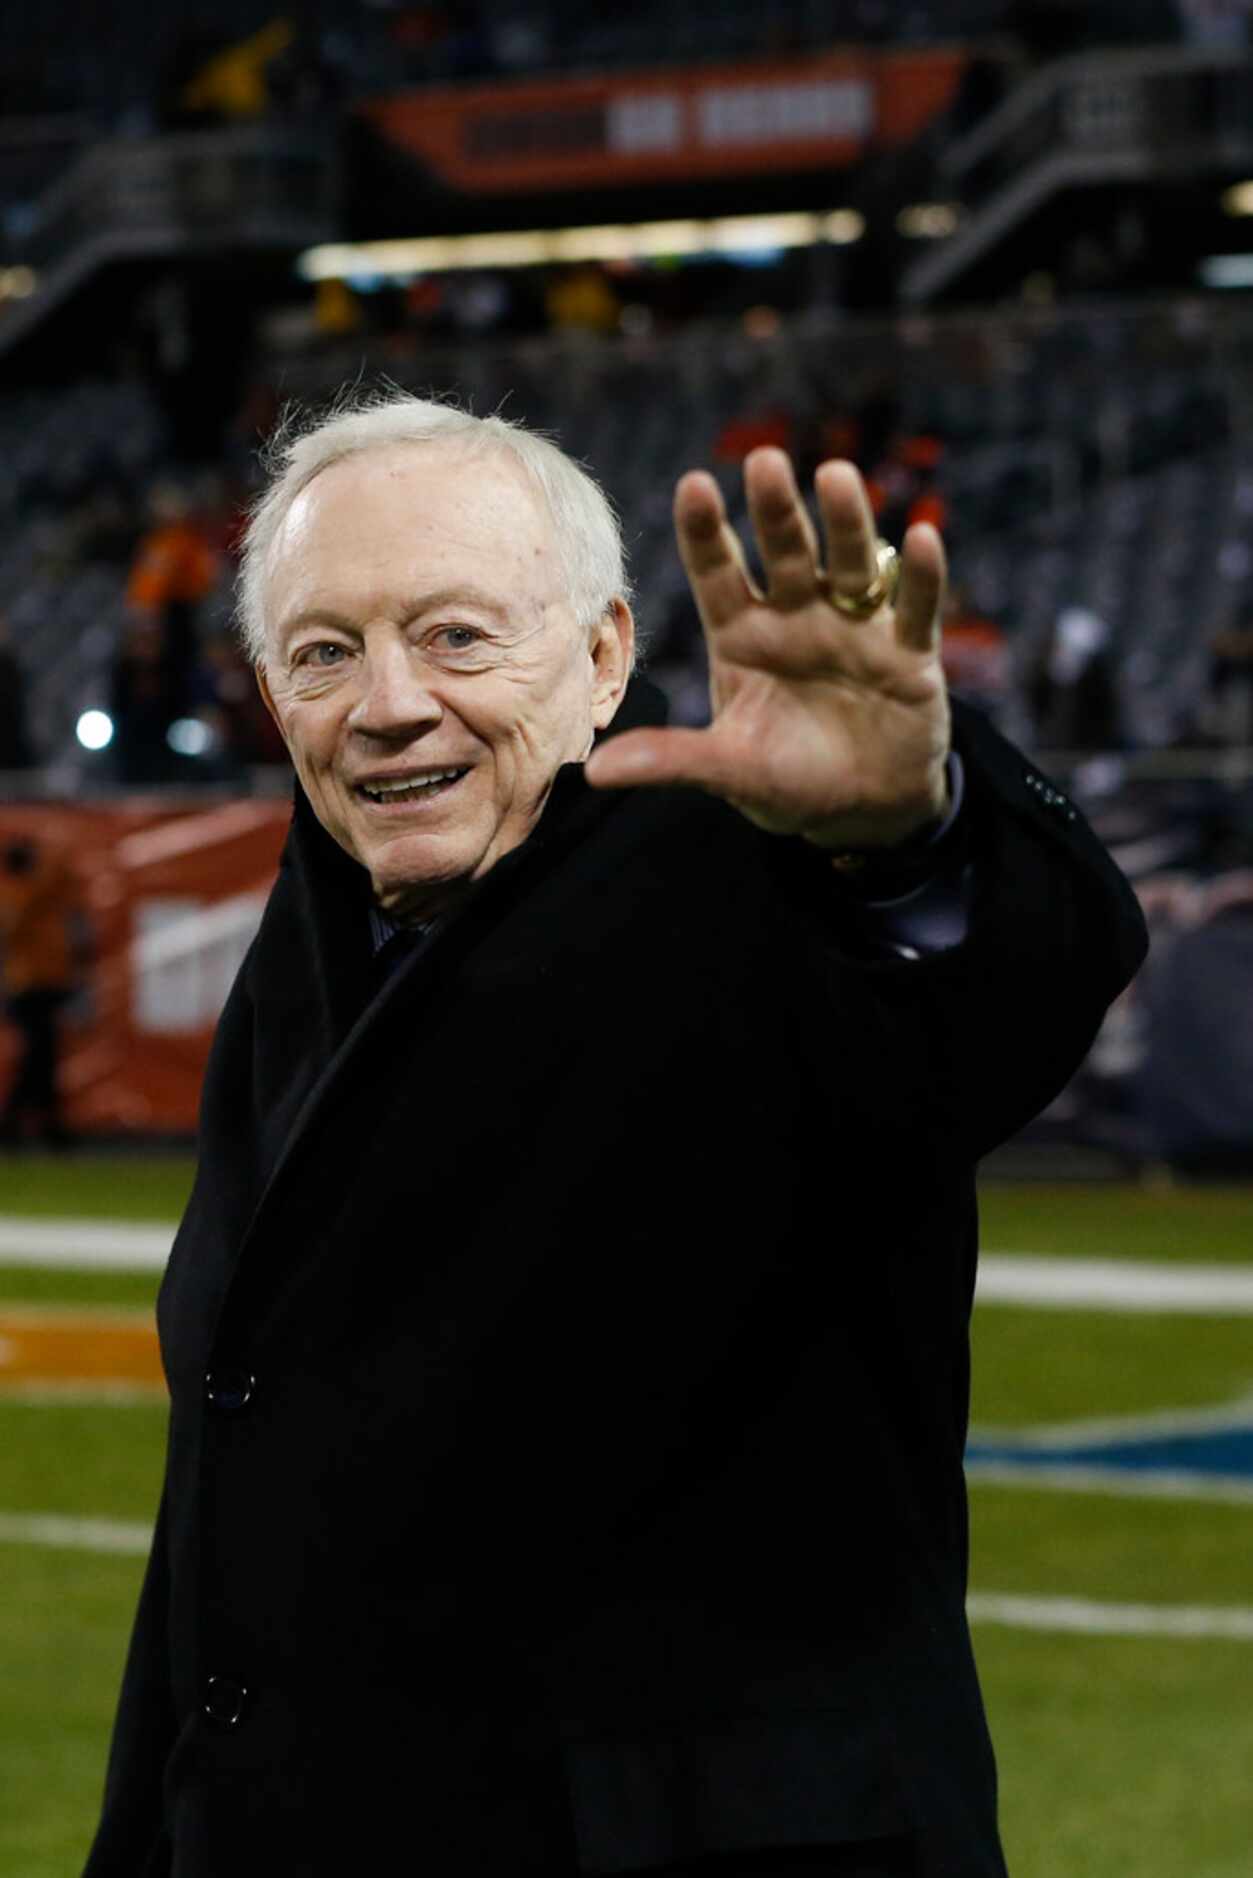 Dallas Cowboys owner Jerry Jones walks onto the field prior to a NFL matchup between the...